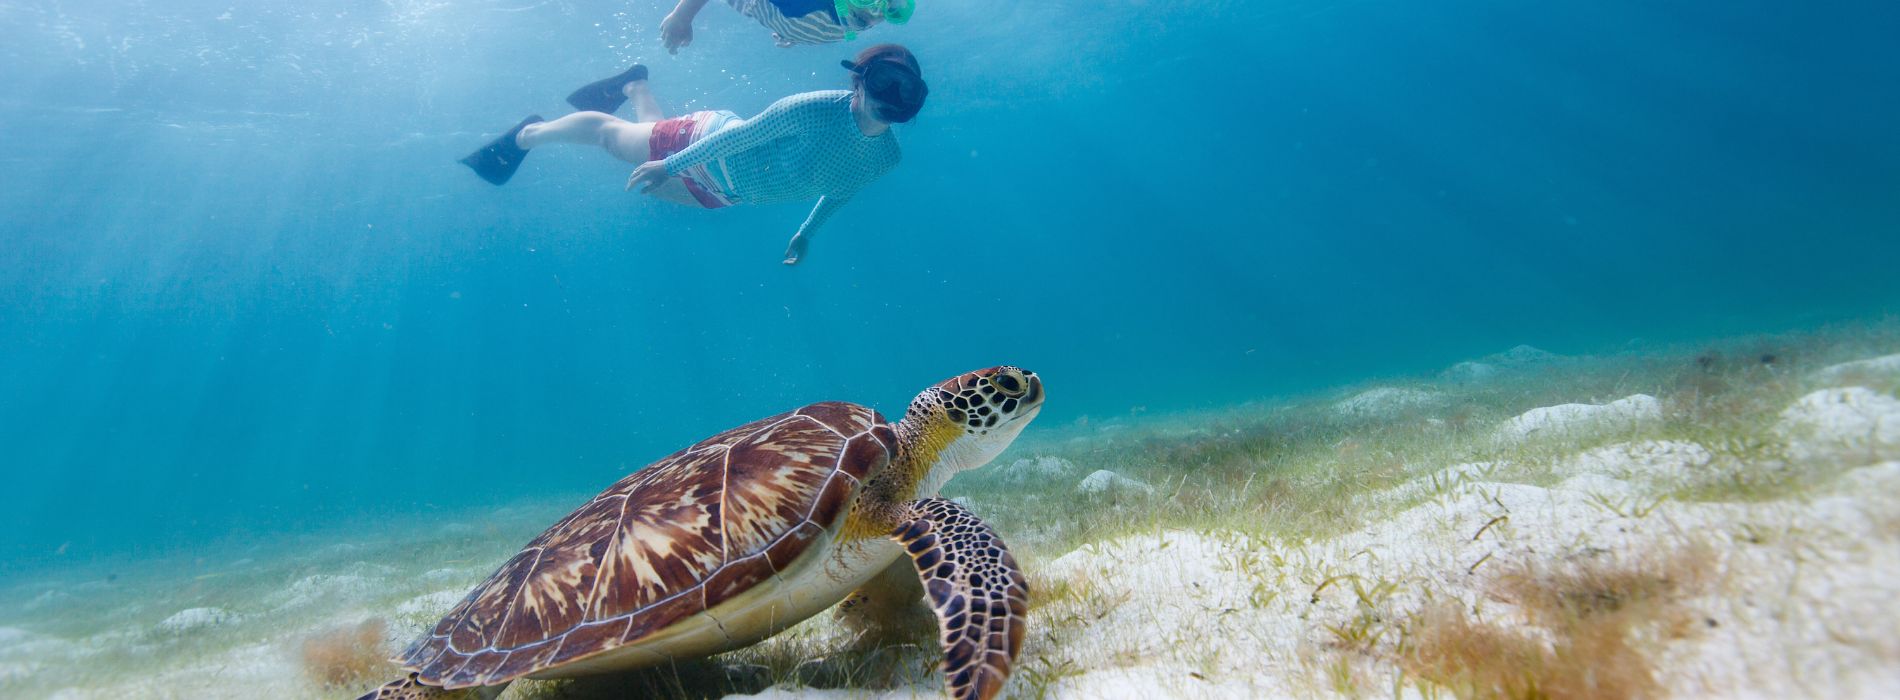 Snorkeling with Sea Turtles in Maui - An Incredible Experience - Madeinsea©